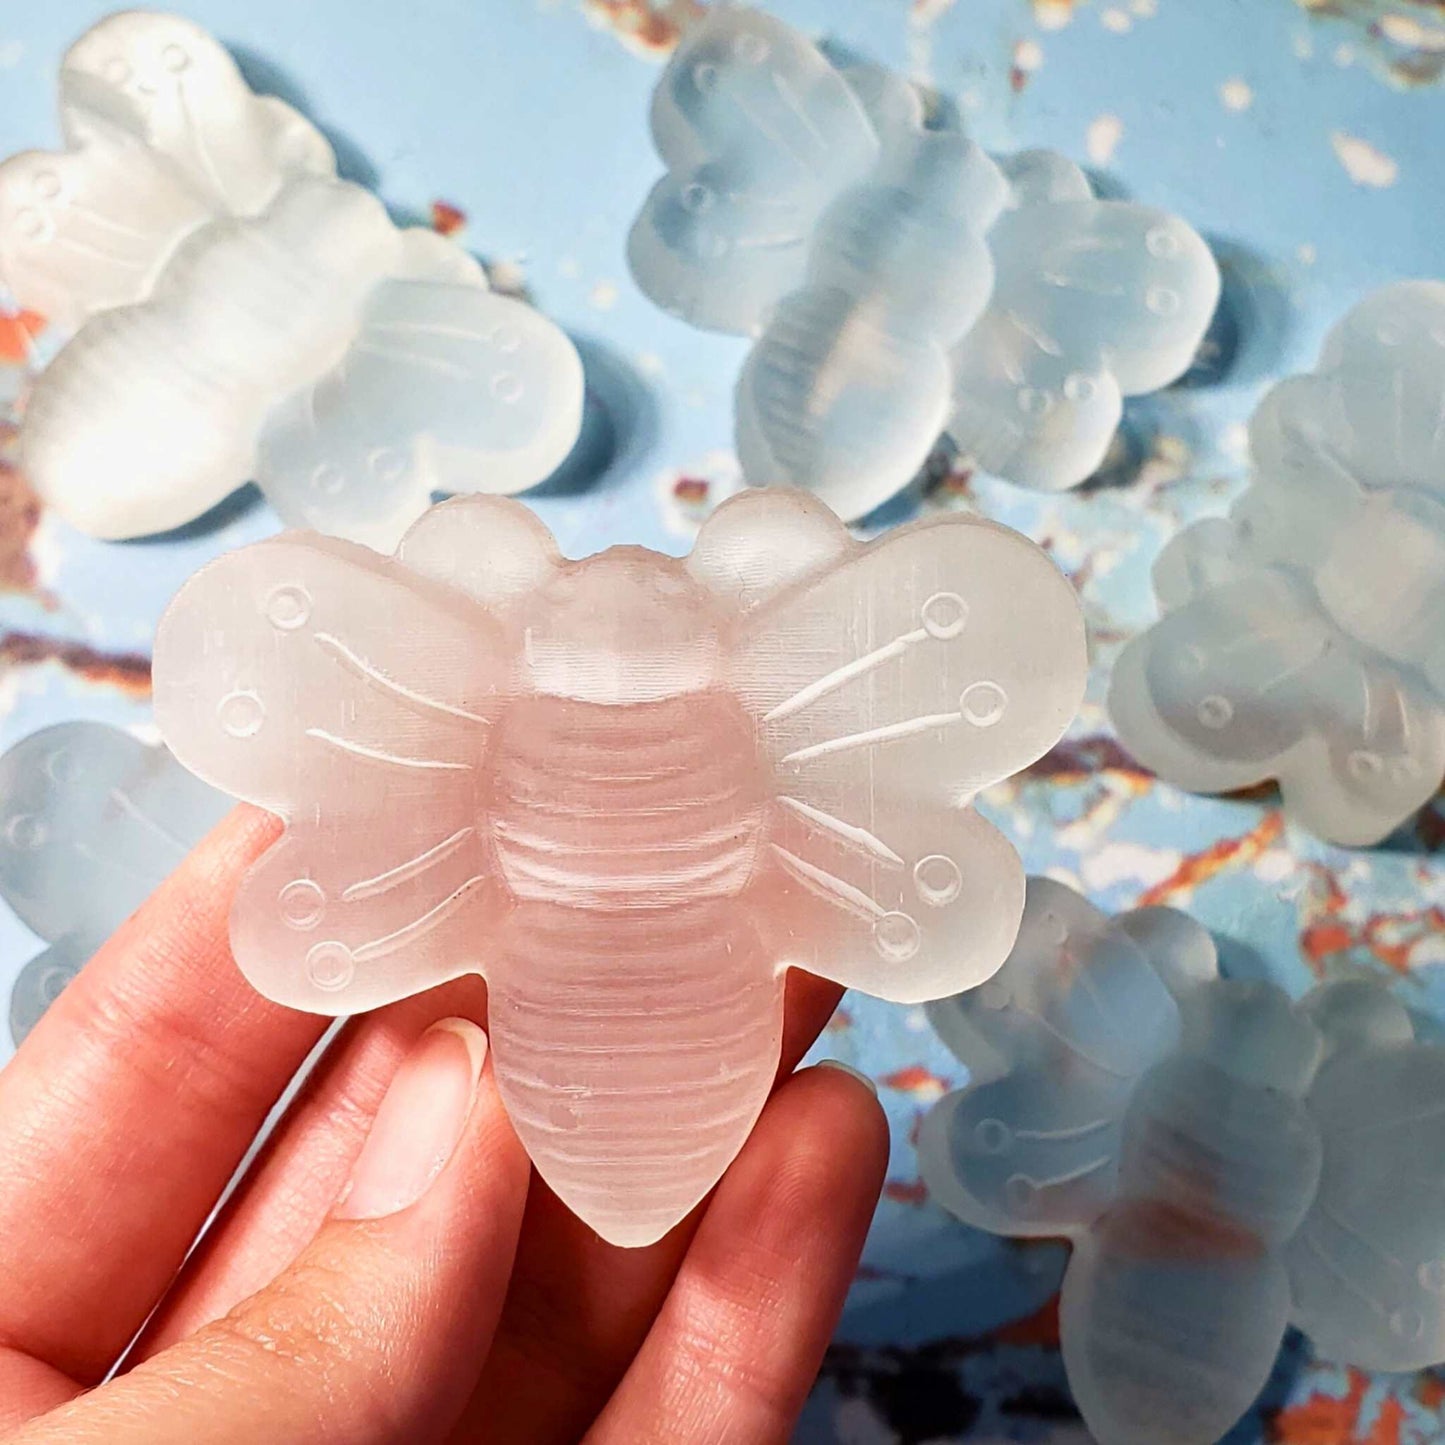 Satin Finished Selenite Bumble Bee: Healing White Light and Energy Clearing Crystal Gift